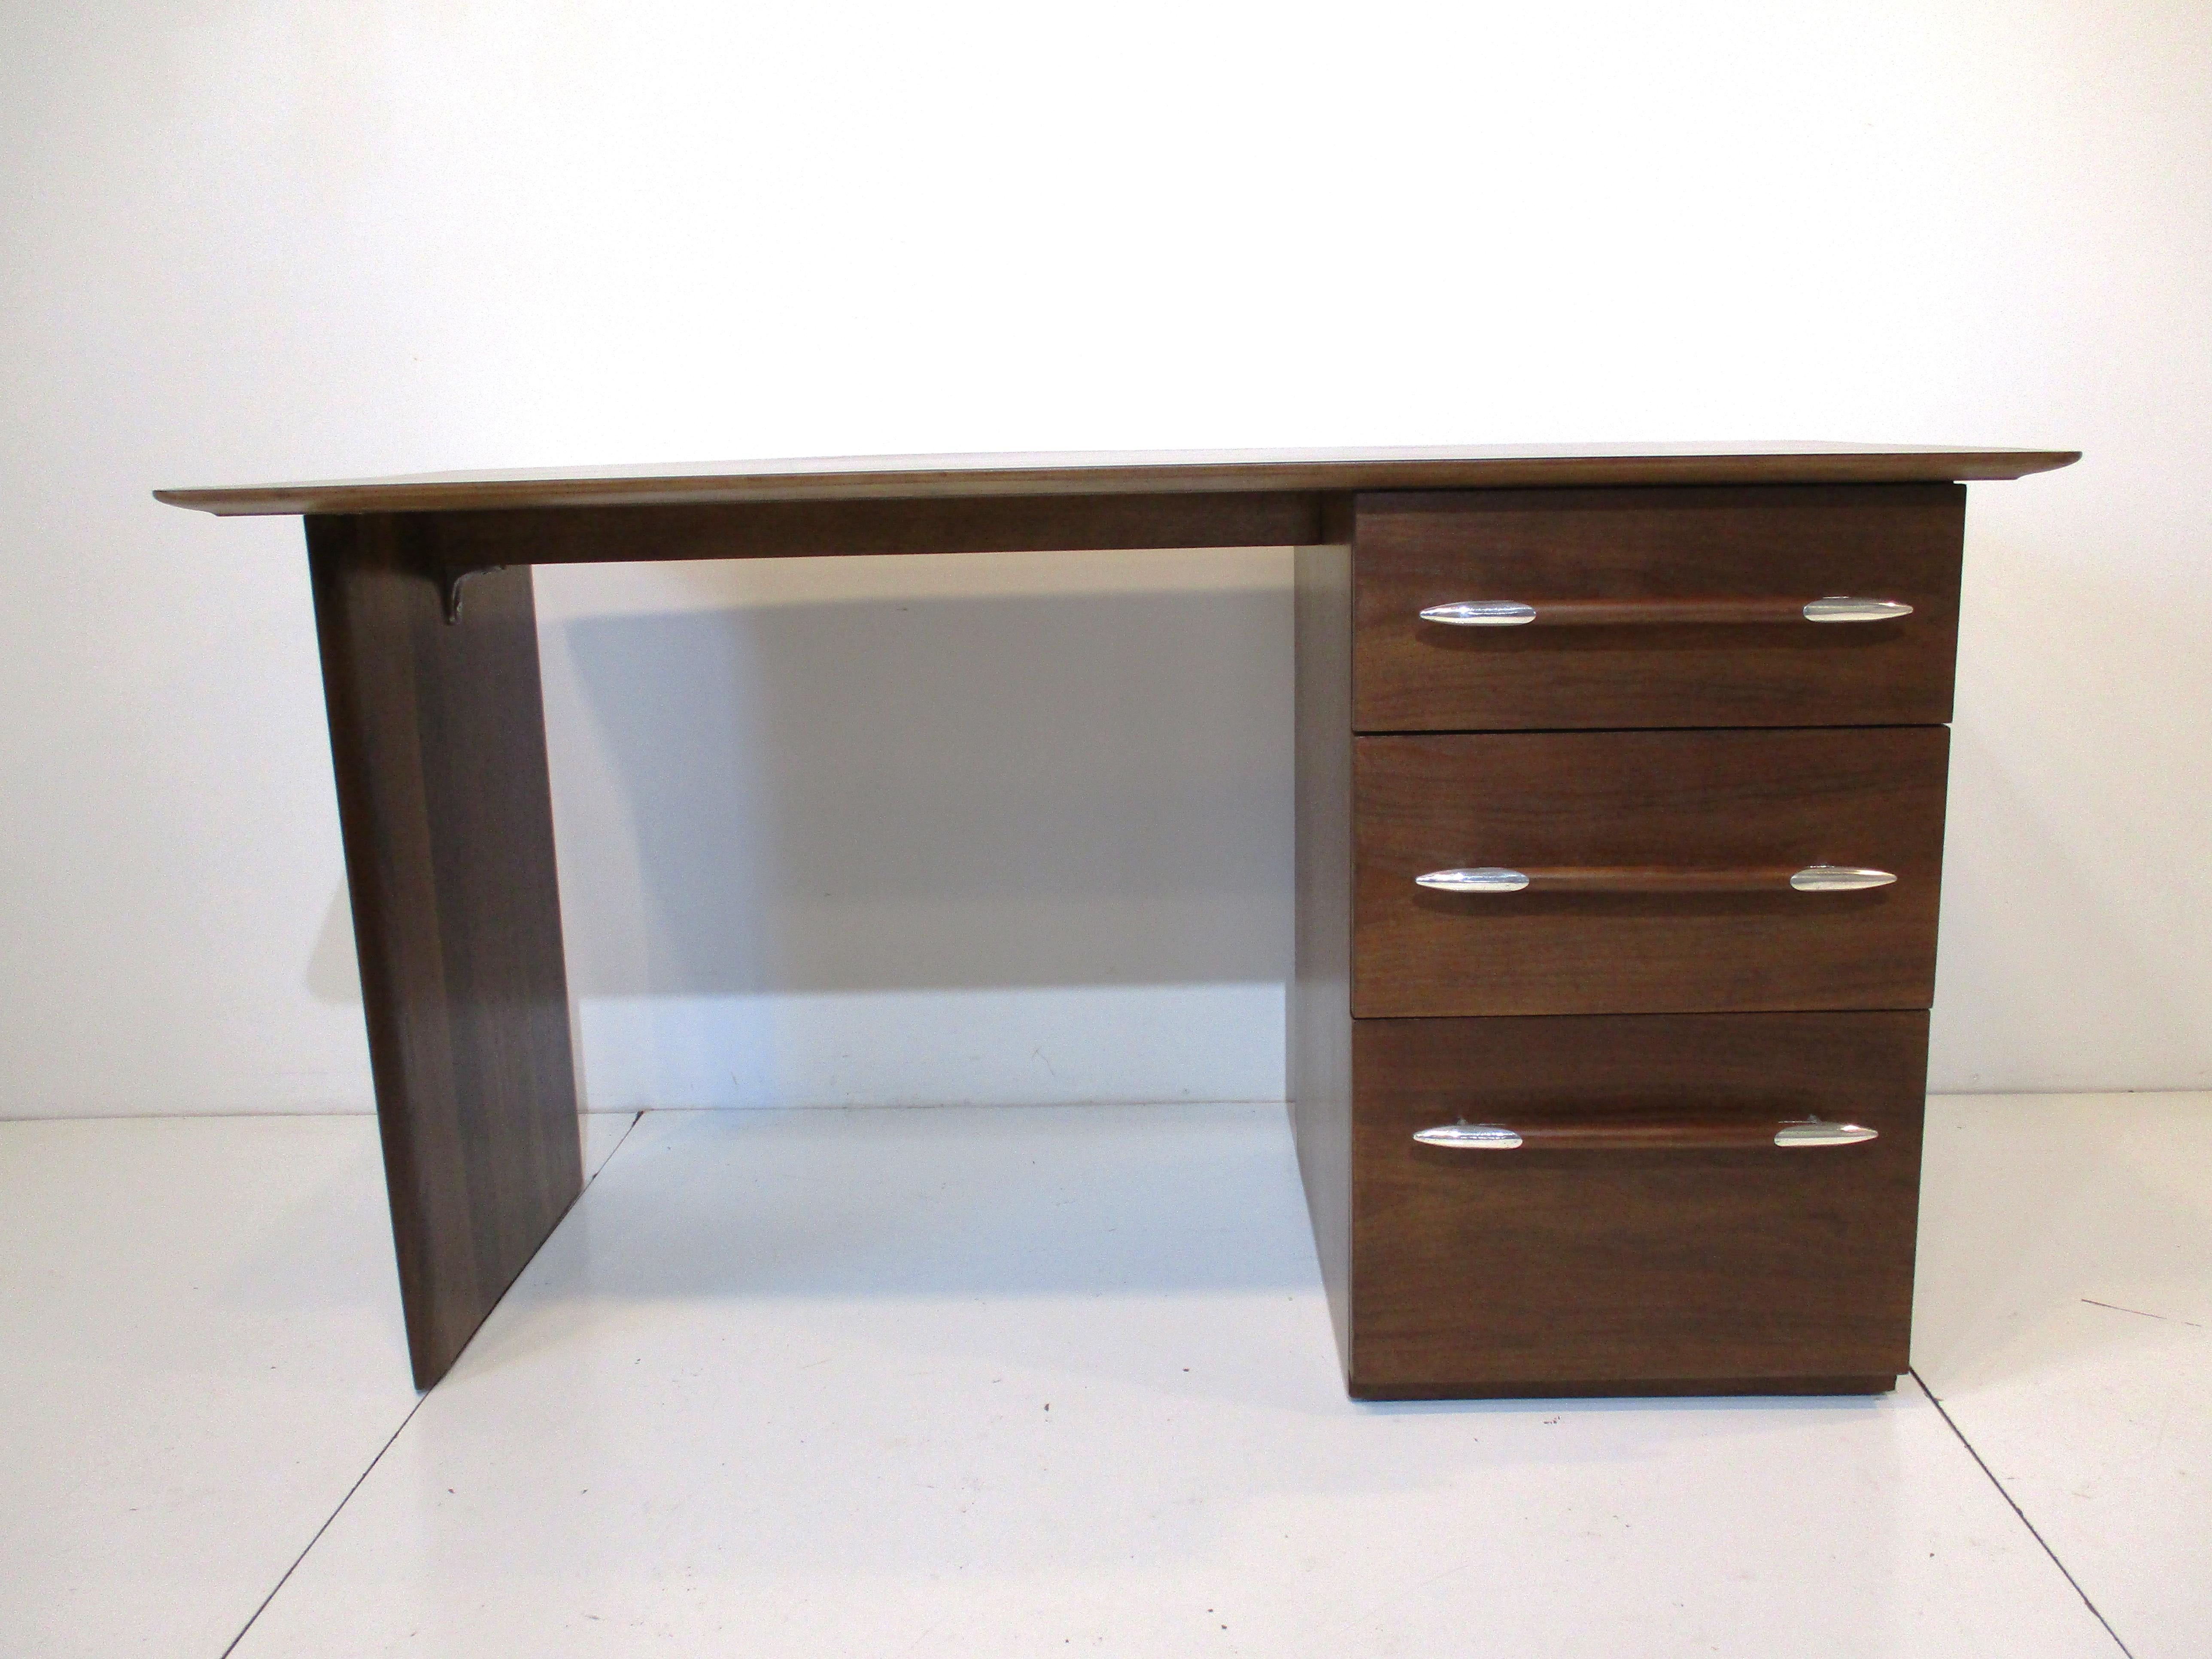 A rare nicely crafted and scaled dark mahogany desk with three drawers having silverplated spear handle tips, the top drawer having pen and paperclip holder. The second drawer has slip in paperwork holder and the bottom has a full file drawer. The